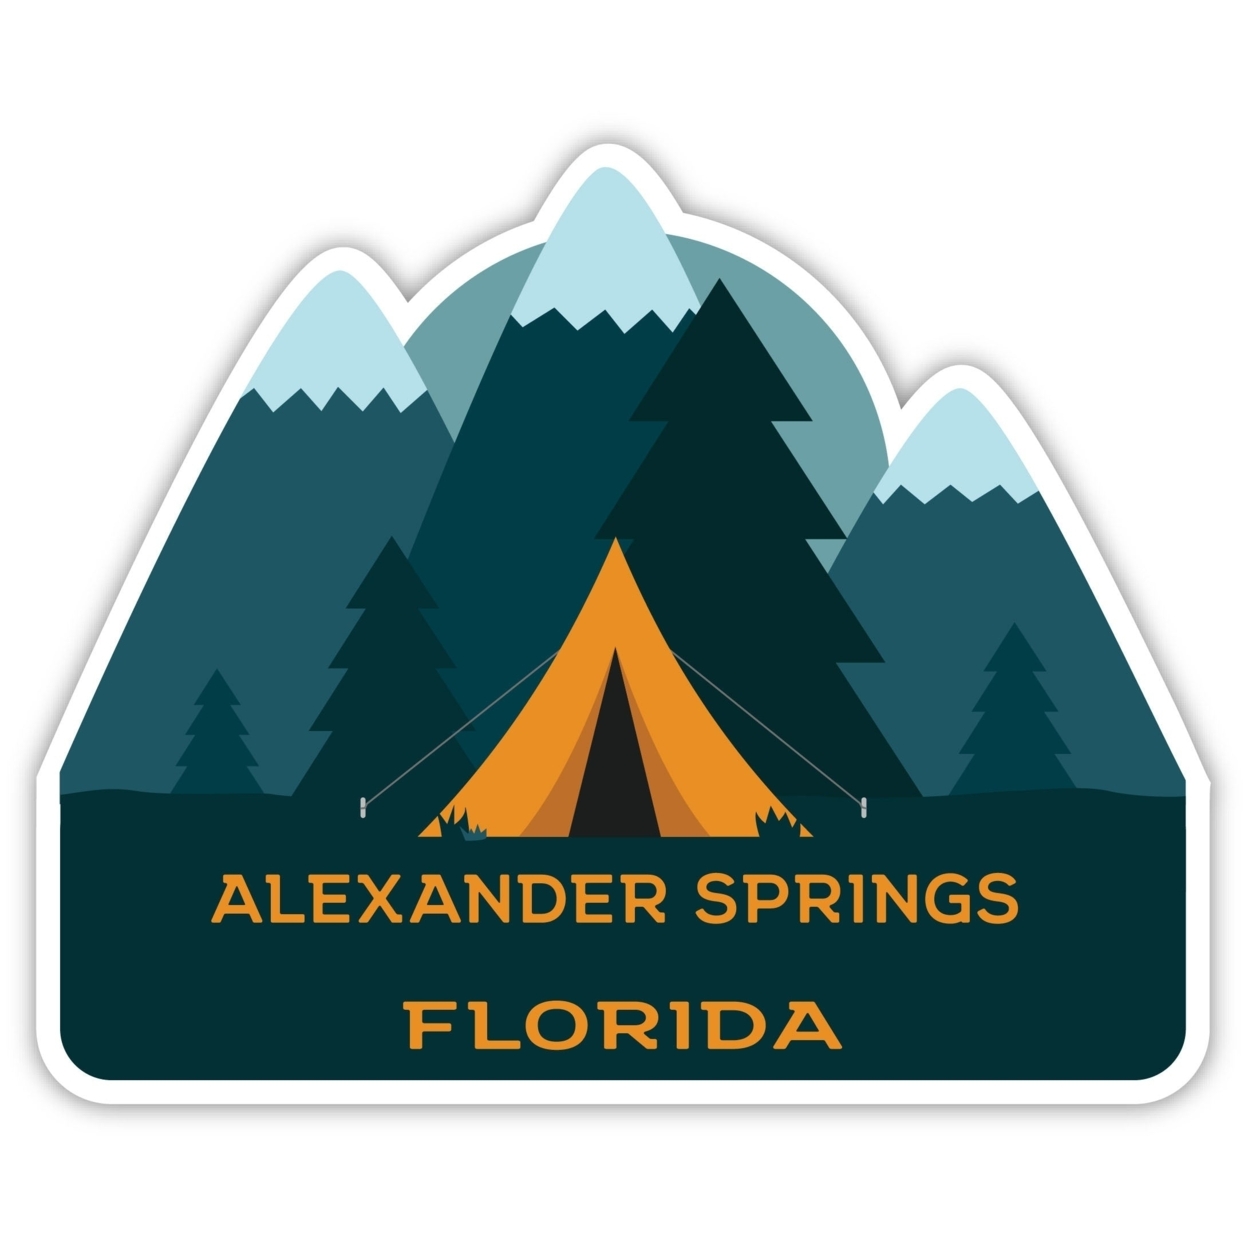 Alexander Springs Florida Souvenir Decorative Stickers (Choose Theme And Size) - 4-Pack, 2-Inch, Bear